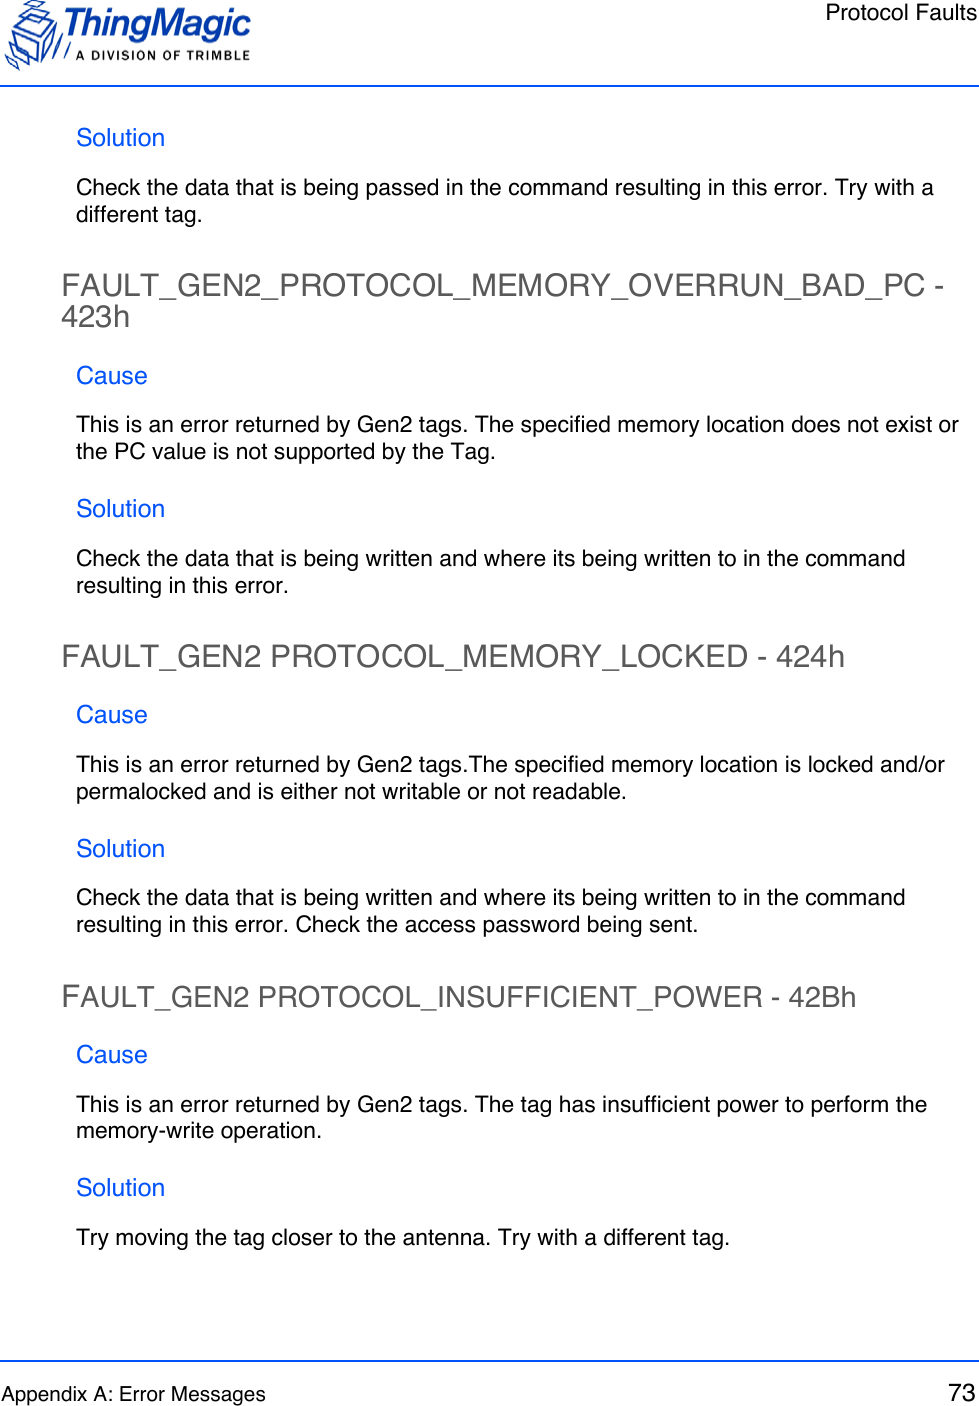 Protocol FaultsAppendix A: Error Messages 73SolutionCheck the data that is being passed in the command resulting in this error. Try with a different tag.FAULT_GEN2_PROTOCOL_MEMORY_OVERRUN_BAD_PC - 423hCauseThis is an error returned by Gen2 tags. The specified memory location does not exist or the PC value is not supported by the Tag. SolutionCheck the data that is being written and where its being written to in the command resulting in this error.FAULT_GEN2 PROTOCOL_MEMORY_LOCKED - 424hCauseThis is an error returned by Gen2 tags.The specified memory location is locked and/or permalocked and is either not writable or not readable.SolutionCheck the data that is being written and where its being written to in the command resulting in this error. Check the access password being sent.FAULT_GEN2 PROTOCOL_INSUFFICIENT_POWER - 42BhCauseThis is an error returned by Gen2 tags. The tag has insufficient power to perform the memory-write operation.SolutionTry moving the tag closer to the antenna. Try with a different tag.